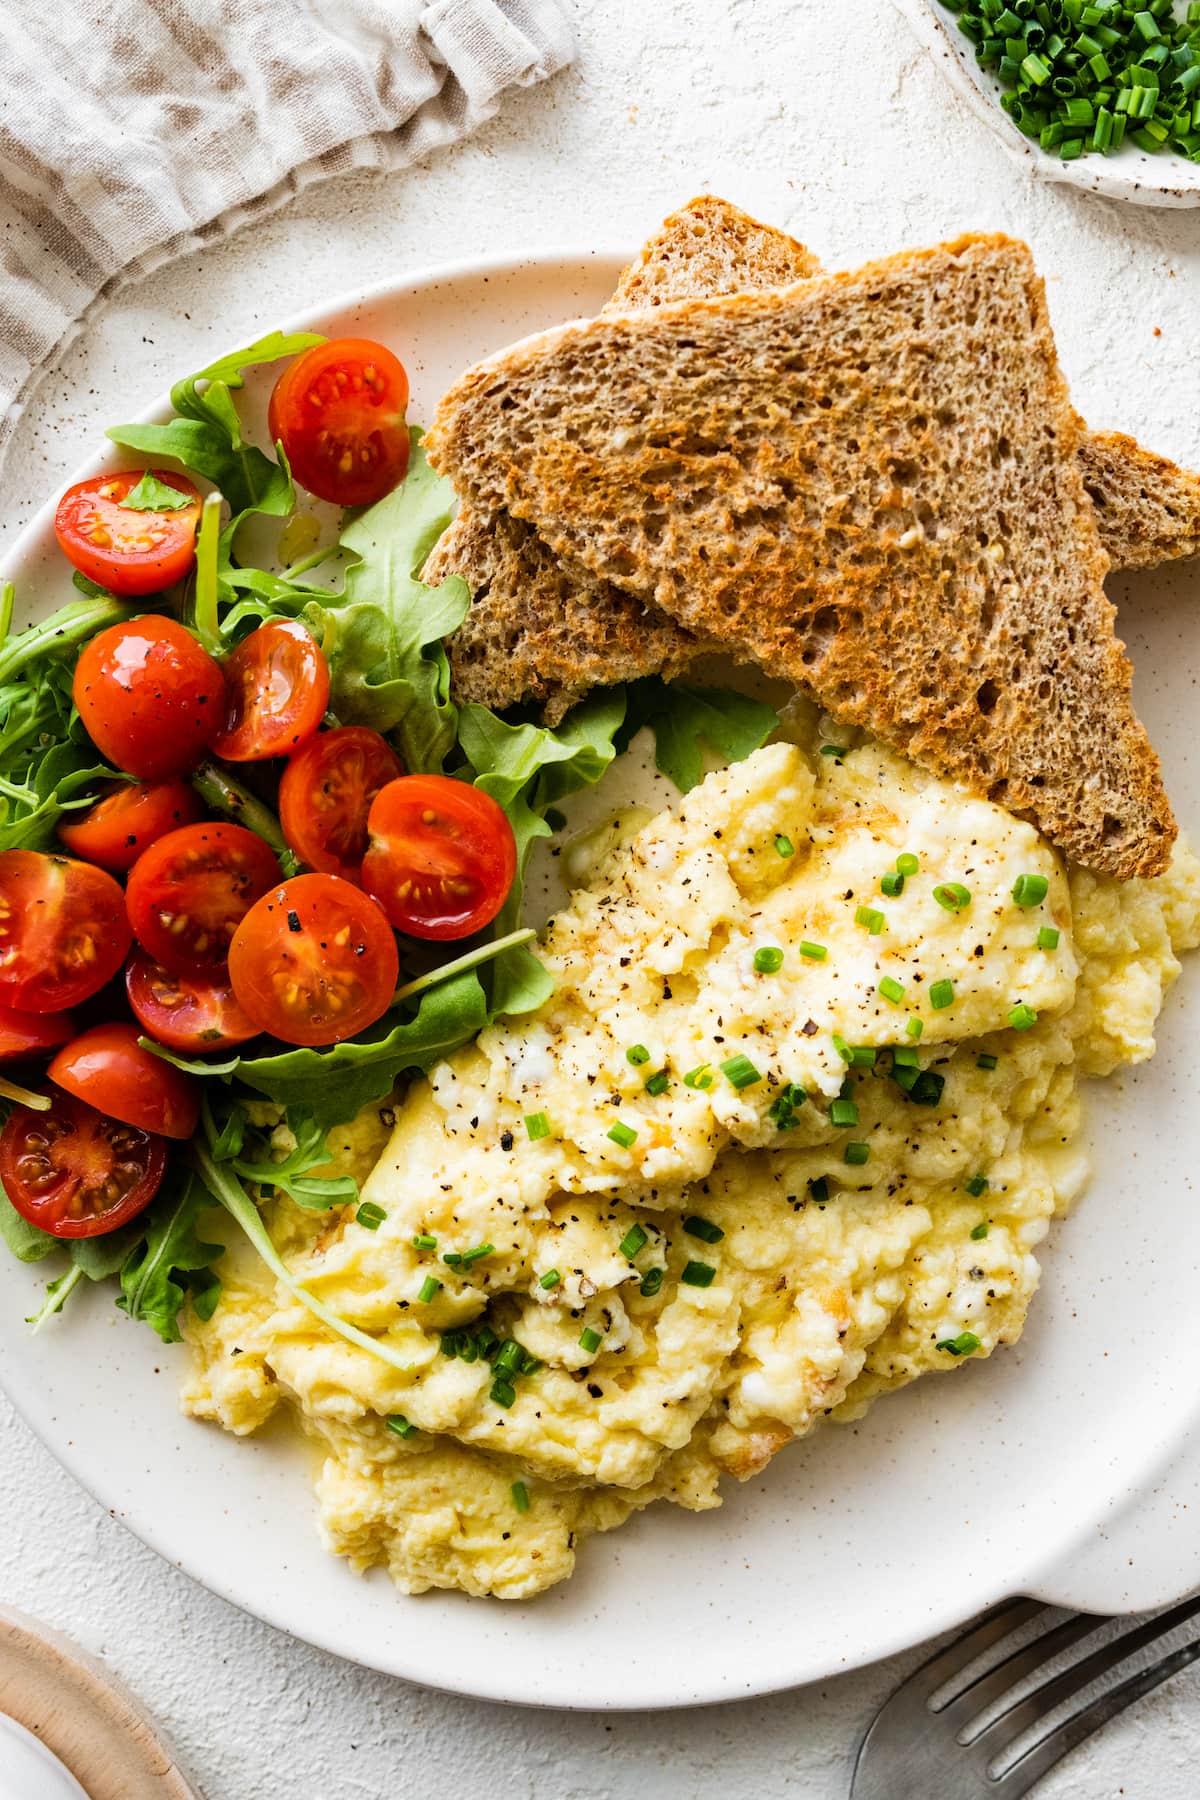 Cottage cheese eggs garnished with chives on a plate with toast and a salad with greens and cherry tomatoes.